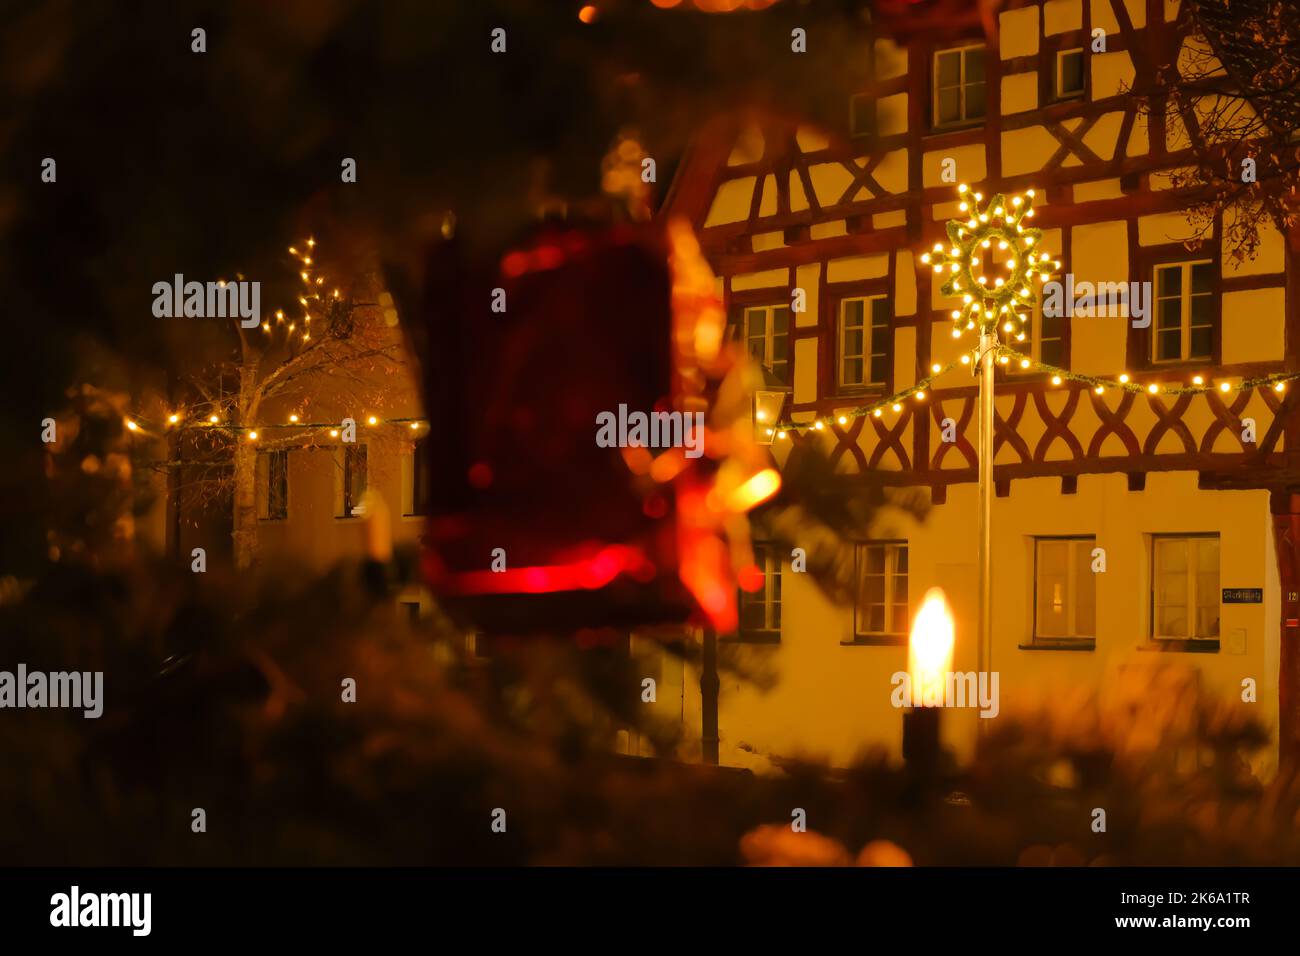 Christmas illumination . half timbered houses and festive decorations.Christmas in Europe.Decorative yellow flashlight and shimmering garland  Stock Photo